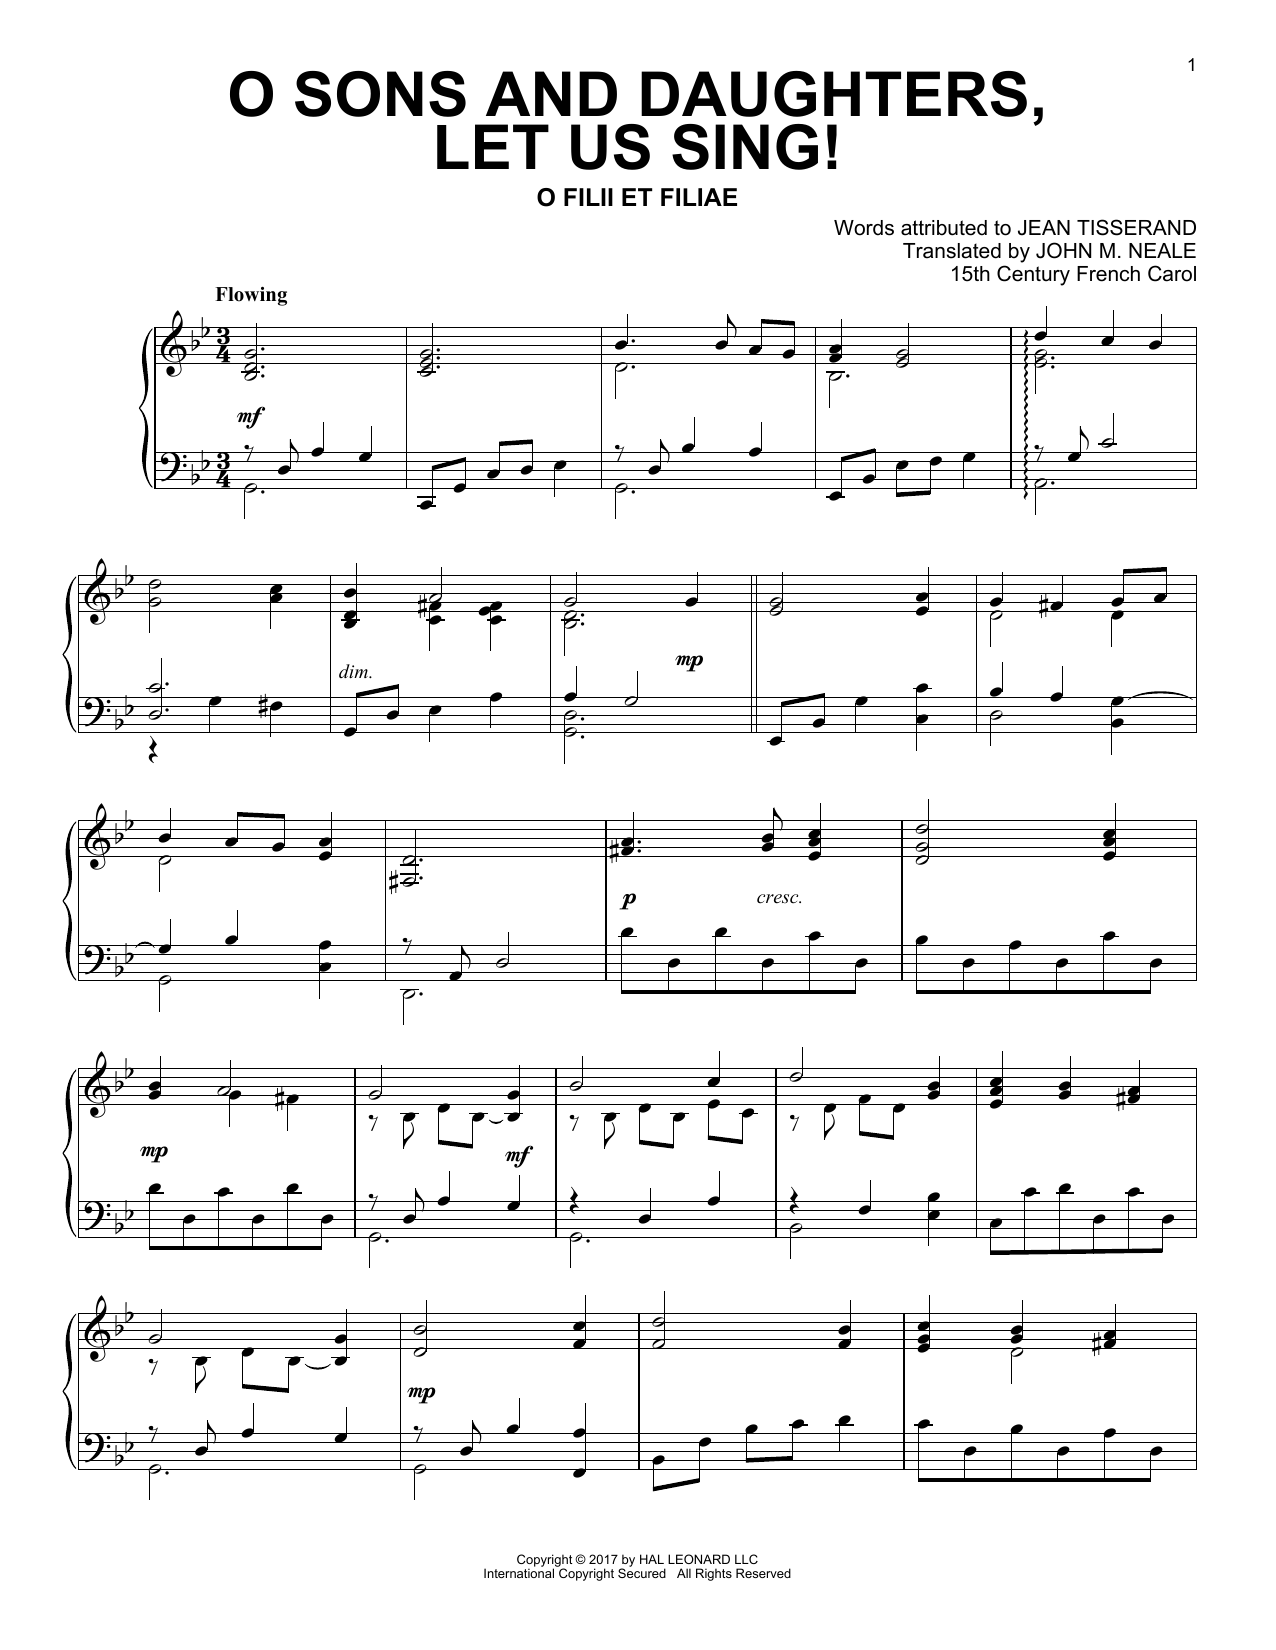 Download Traditional Carol O Sons And Daughters, Let Us Sing! Sheet Music